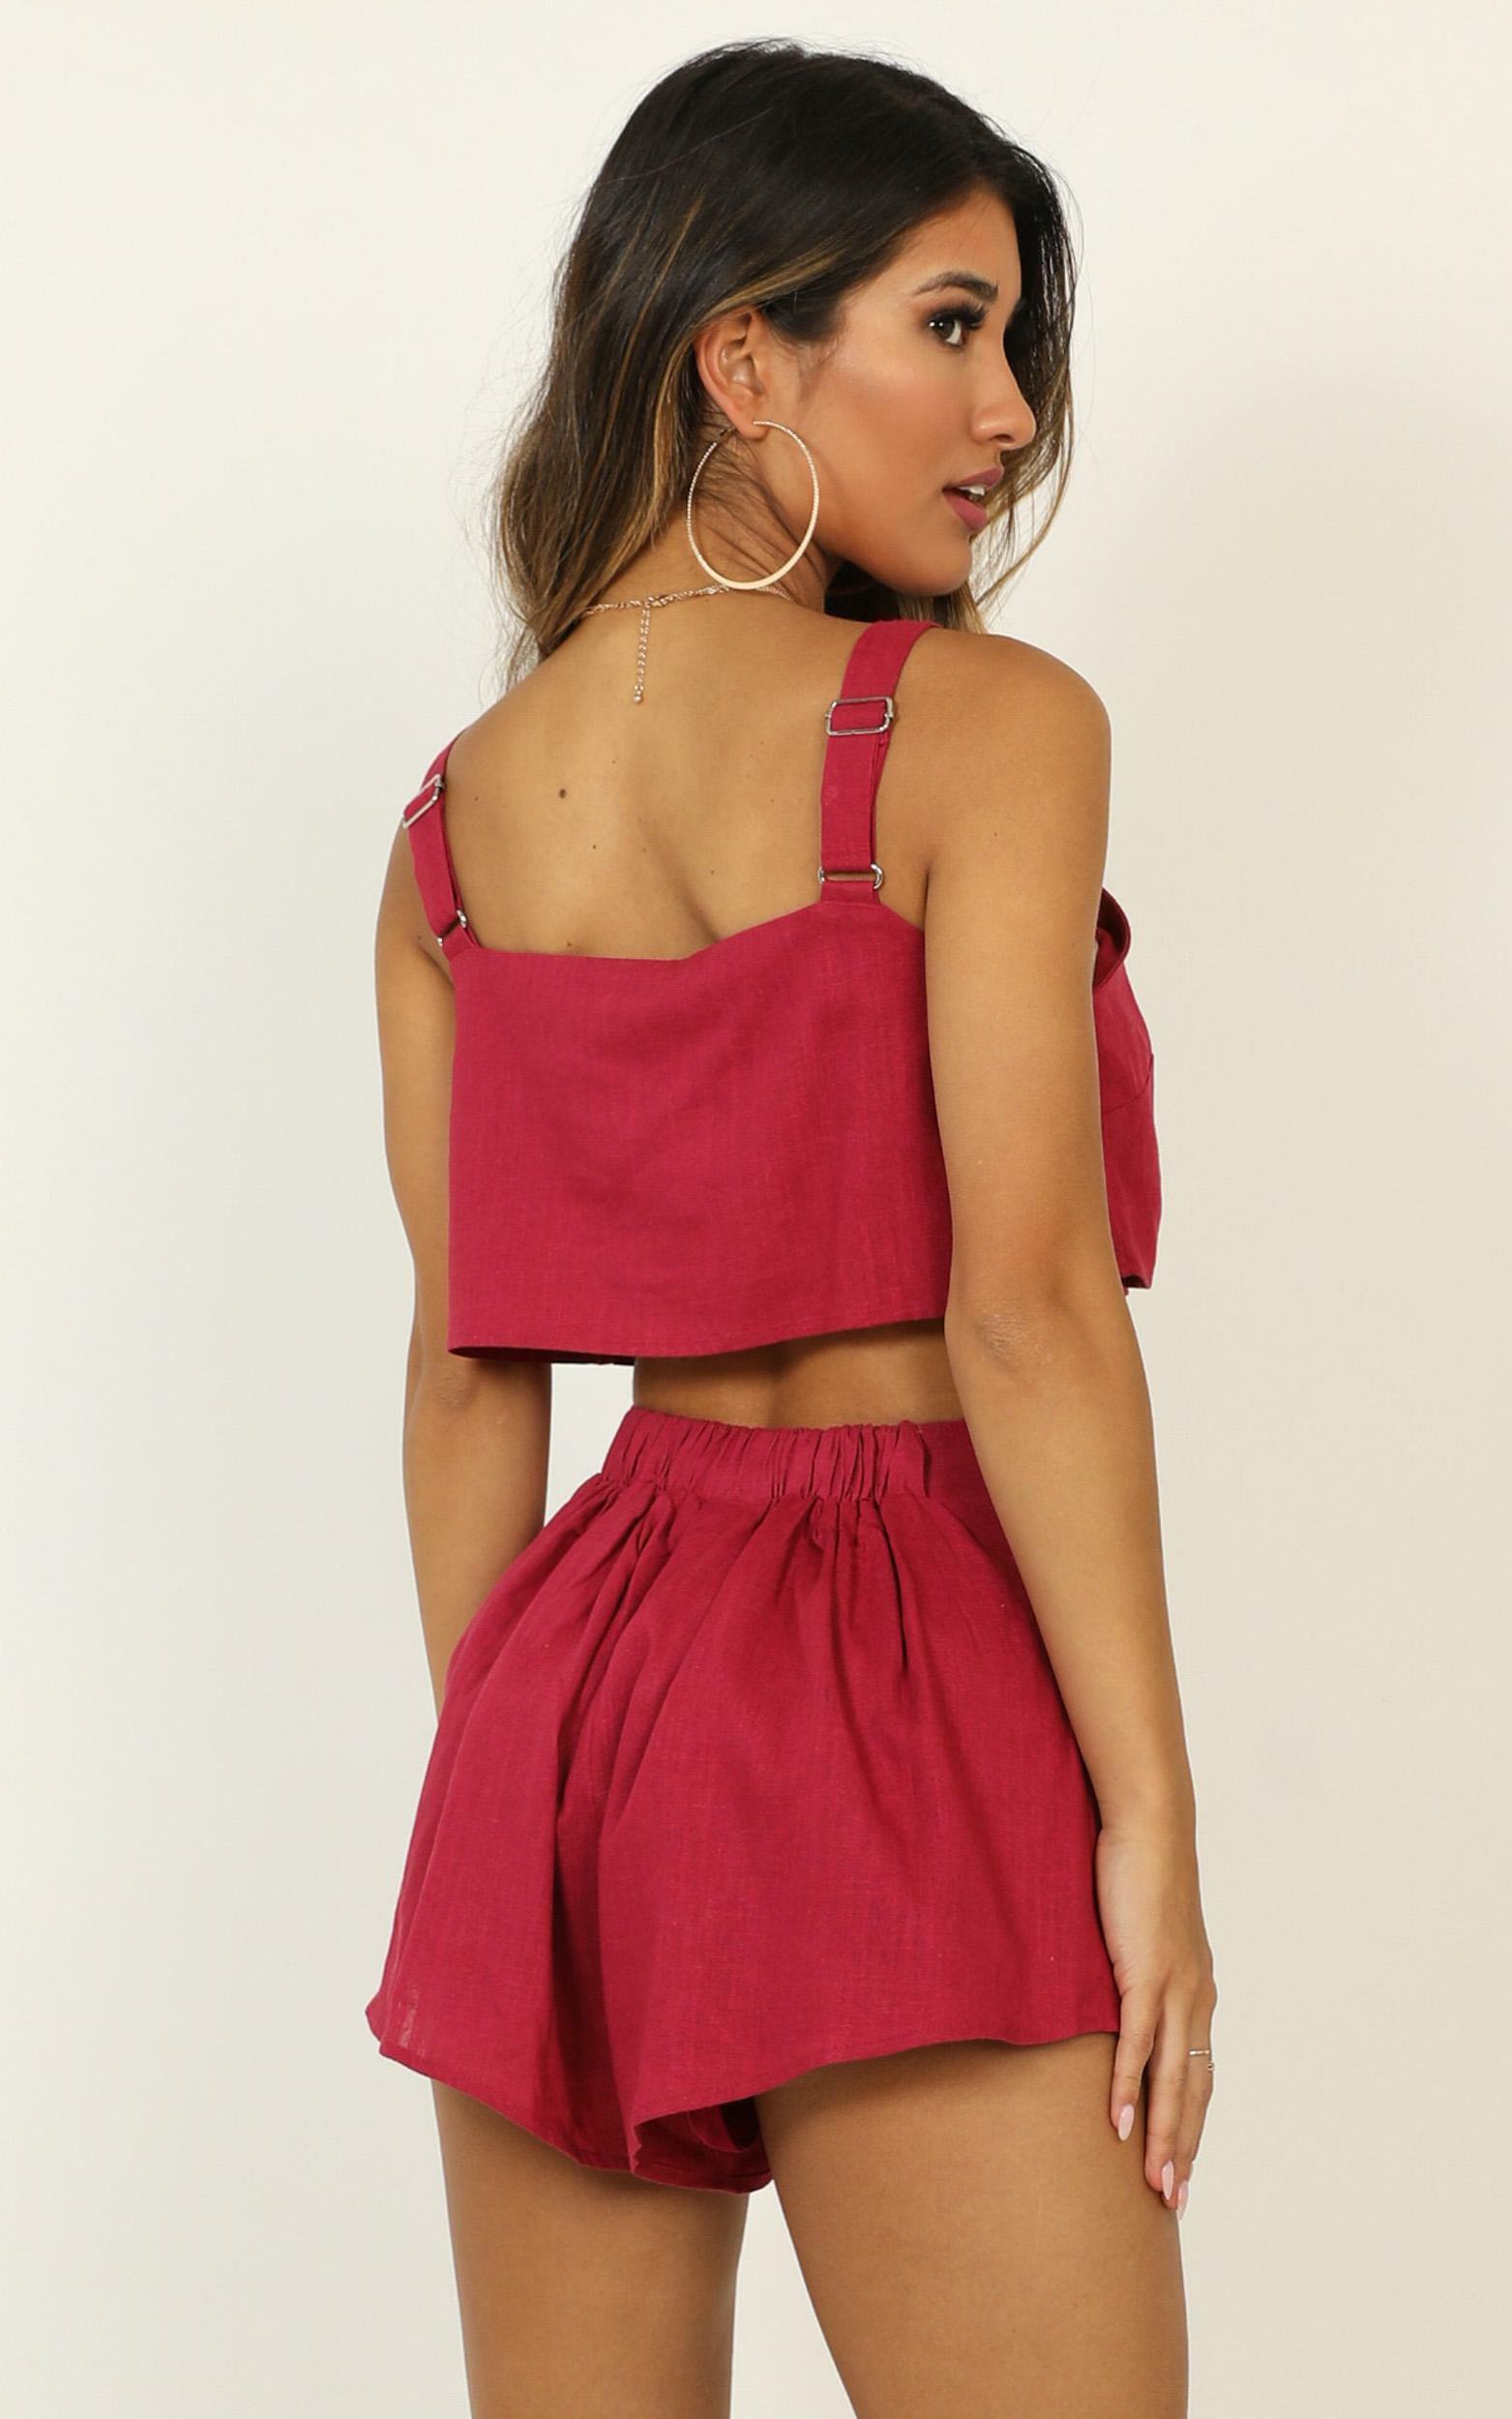 Zanrie Square Neck Crop Top and High Waist Mini Flare Shorts in Berry Linen Look - 18, PNK7, hi-res image number null